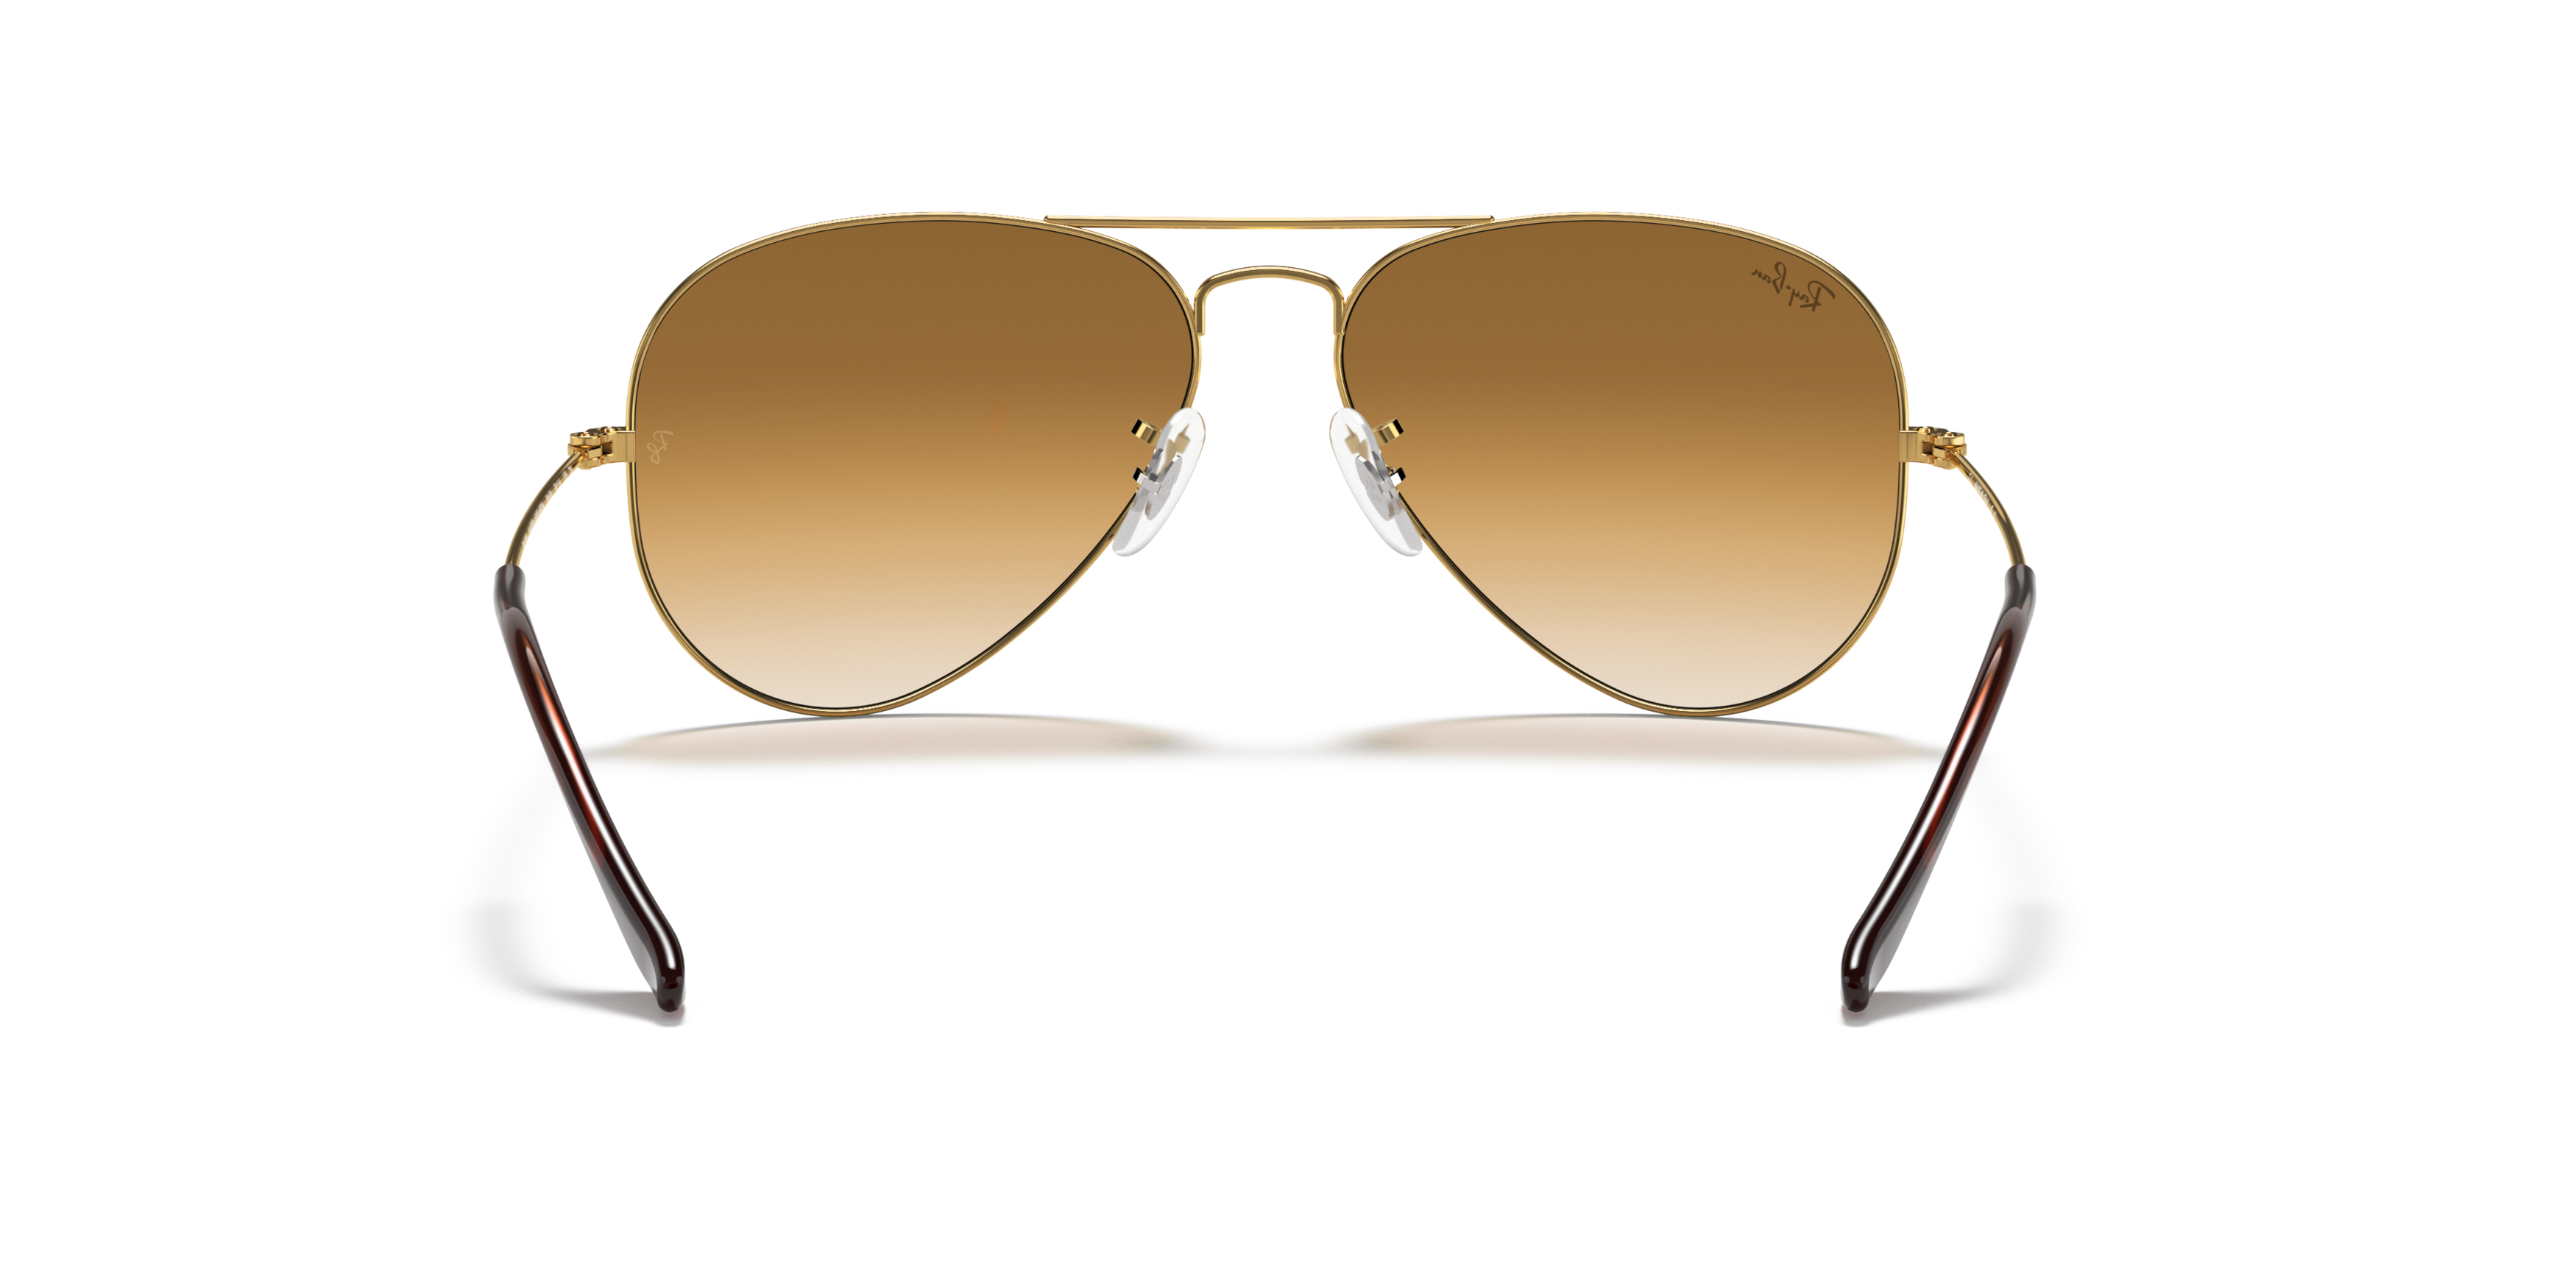 [products.image.detail02] Ray-Ban Aviator RB3025 001/51